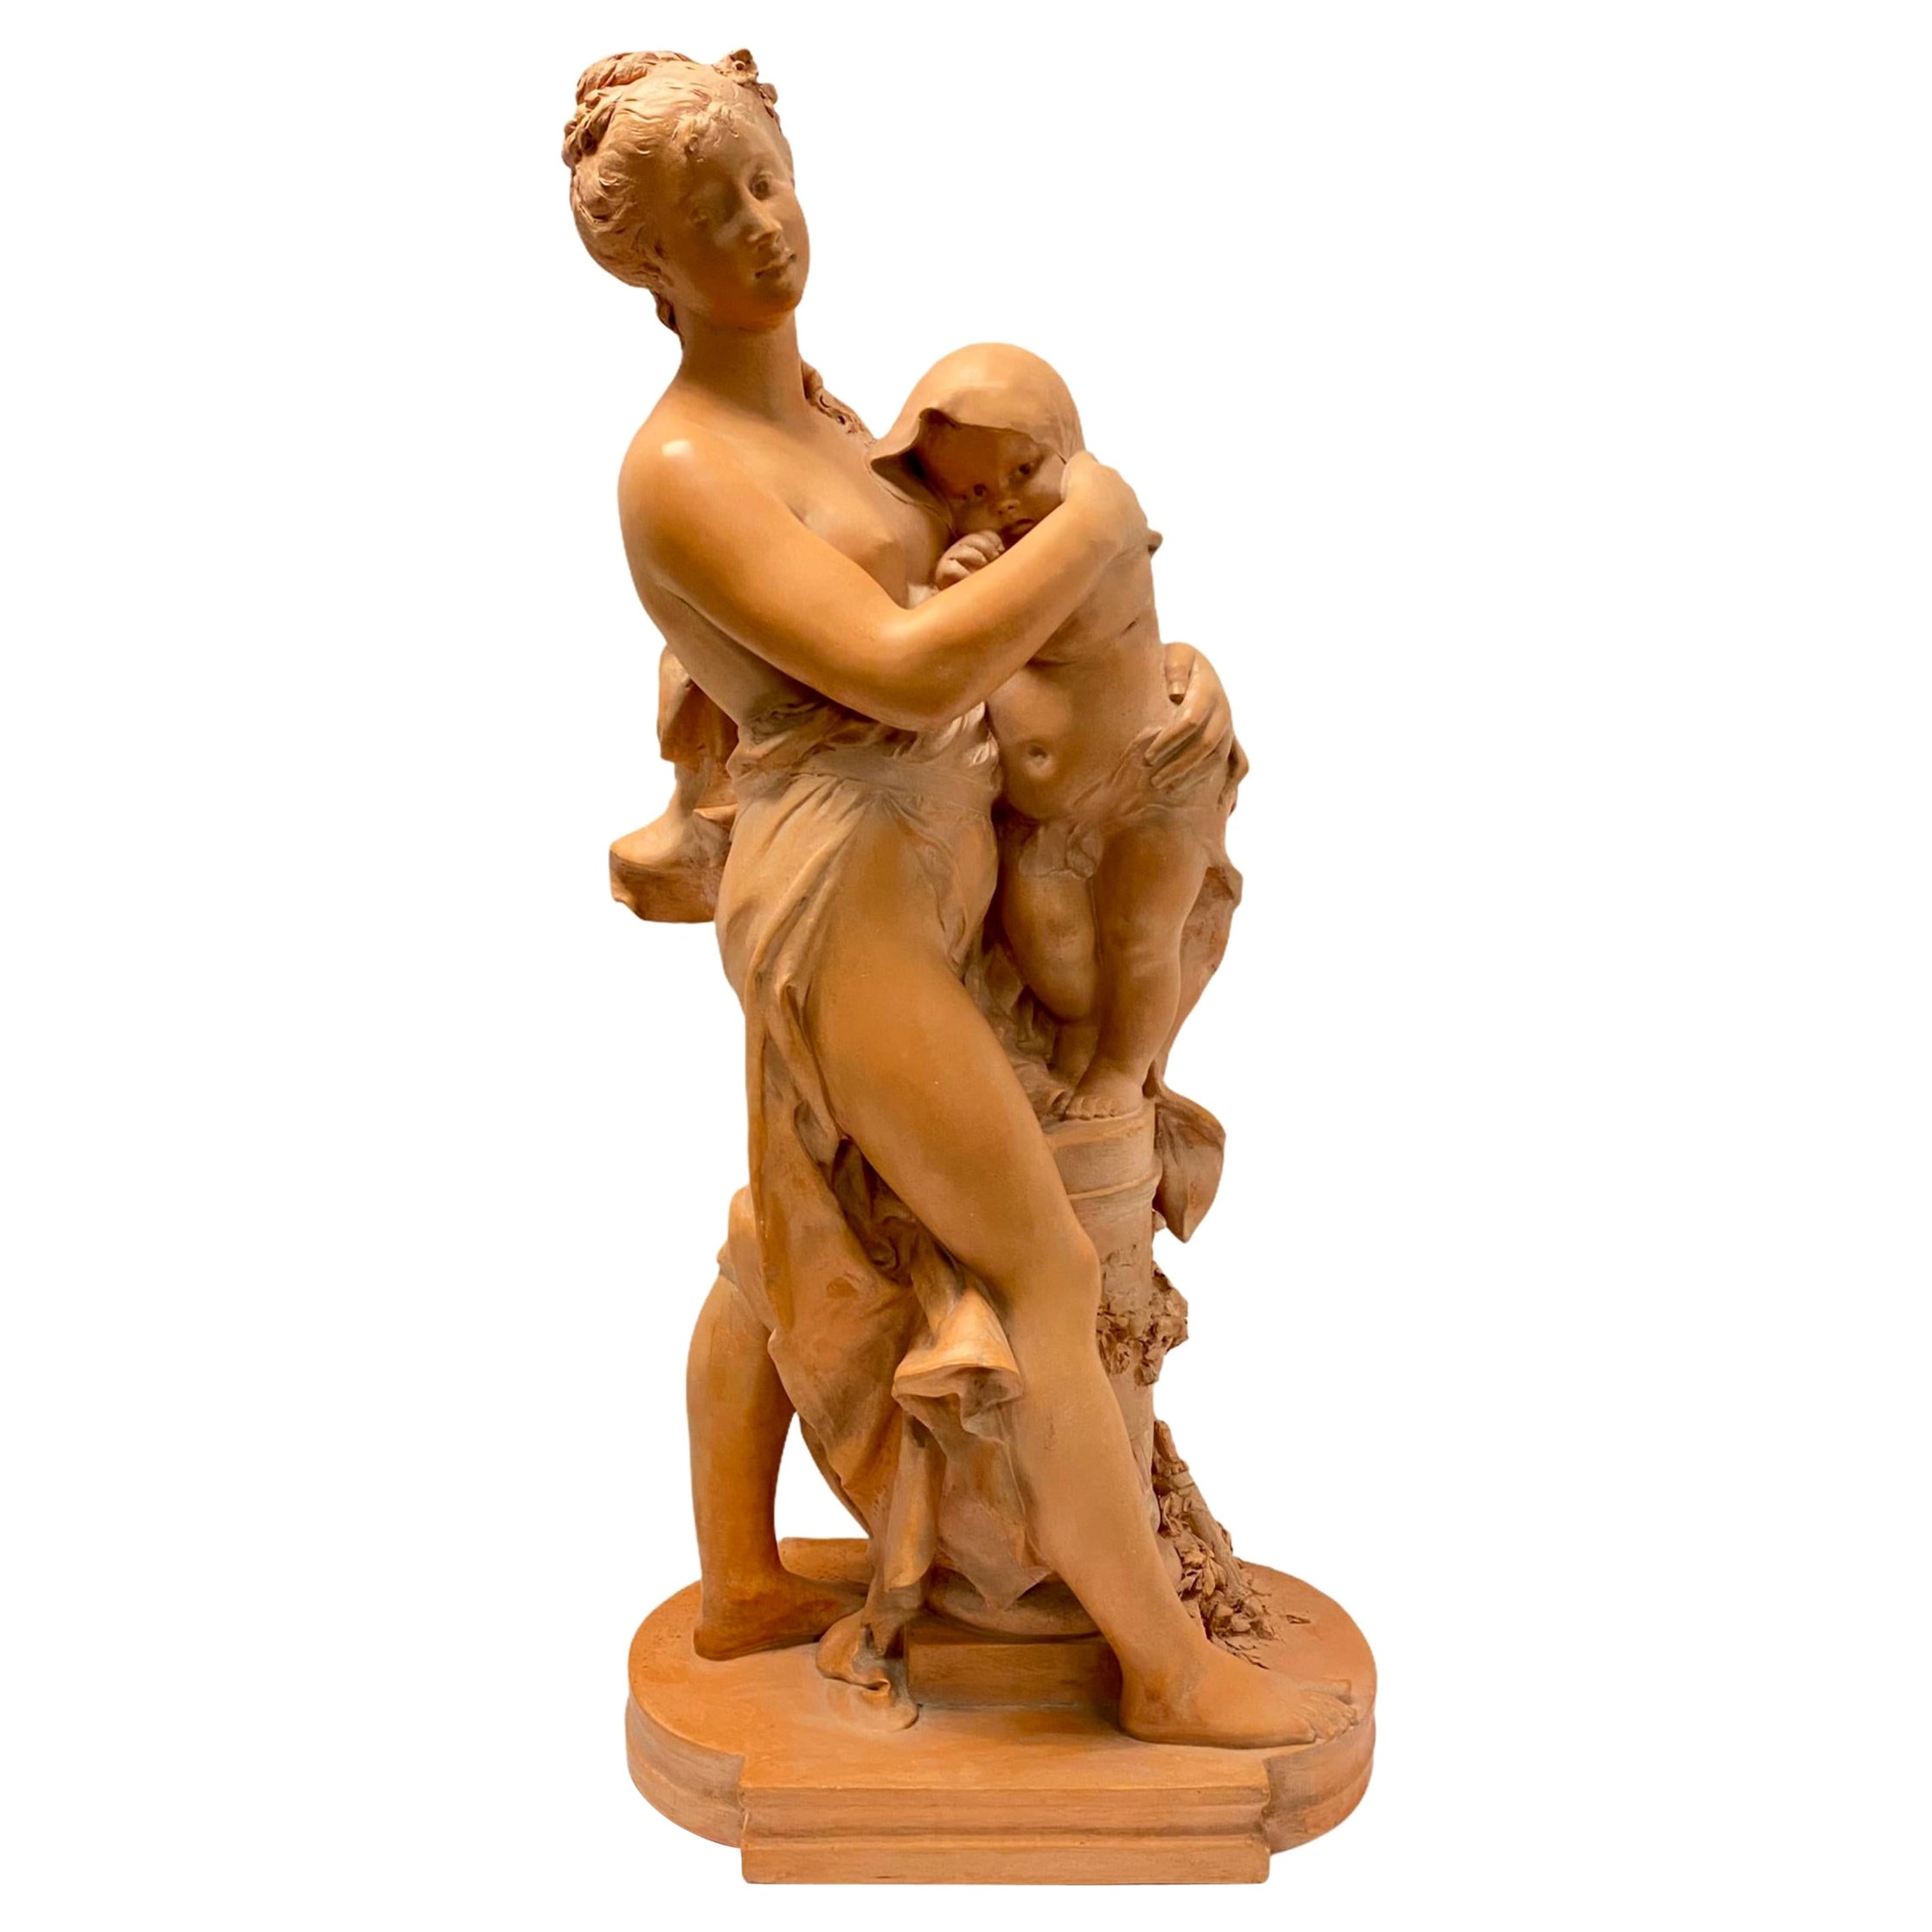 Mother and Child Terracotta Sculpture Signed Rougelet